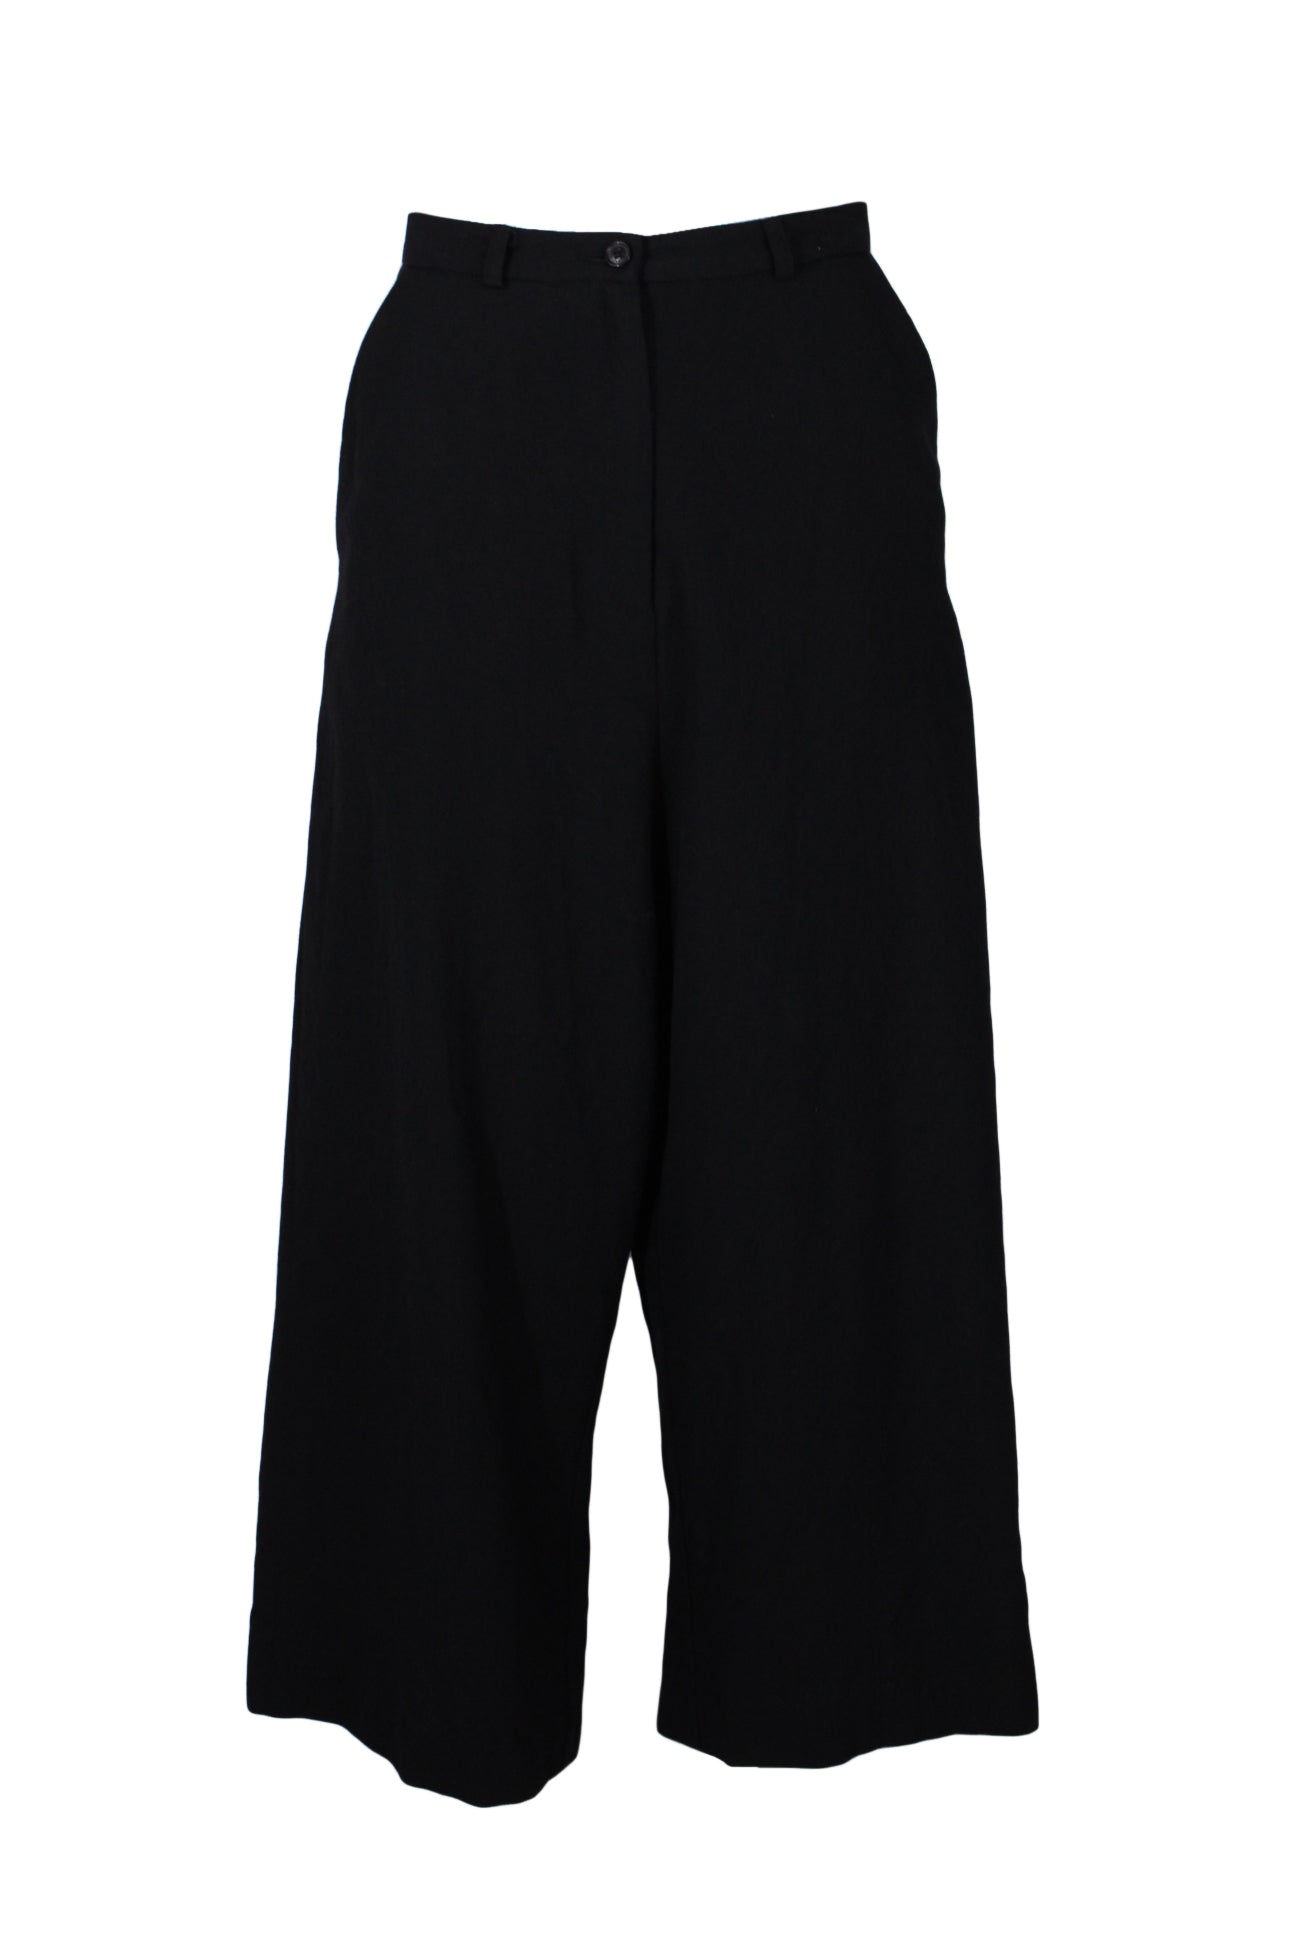 front angle samuji black lightly-textured wide leg wool pants featuring high-waist, front slash pockets, and zipper fly with buttoned waistband.